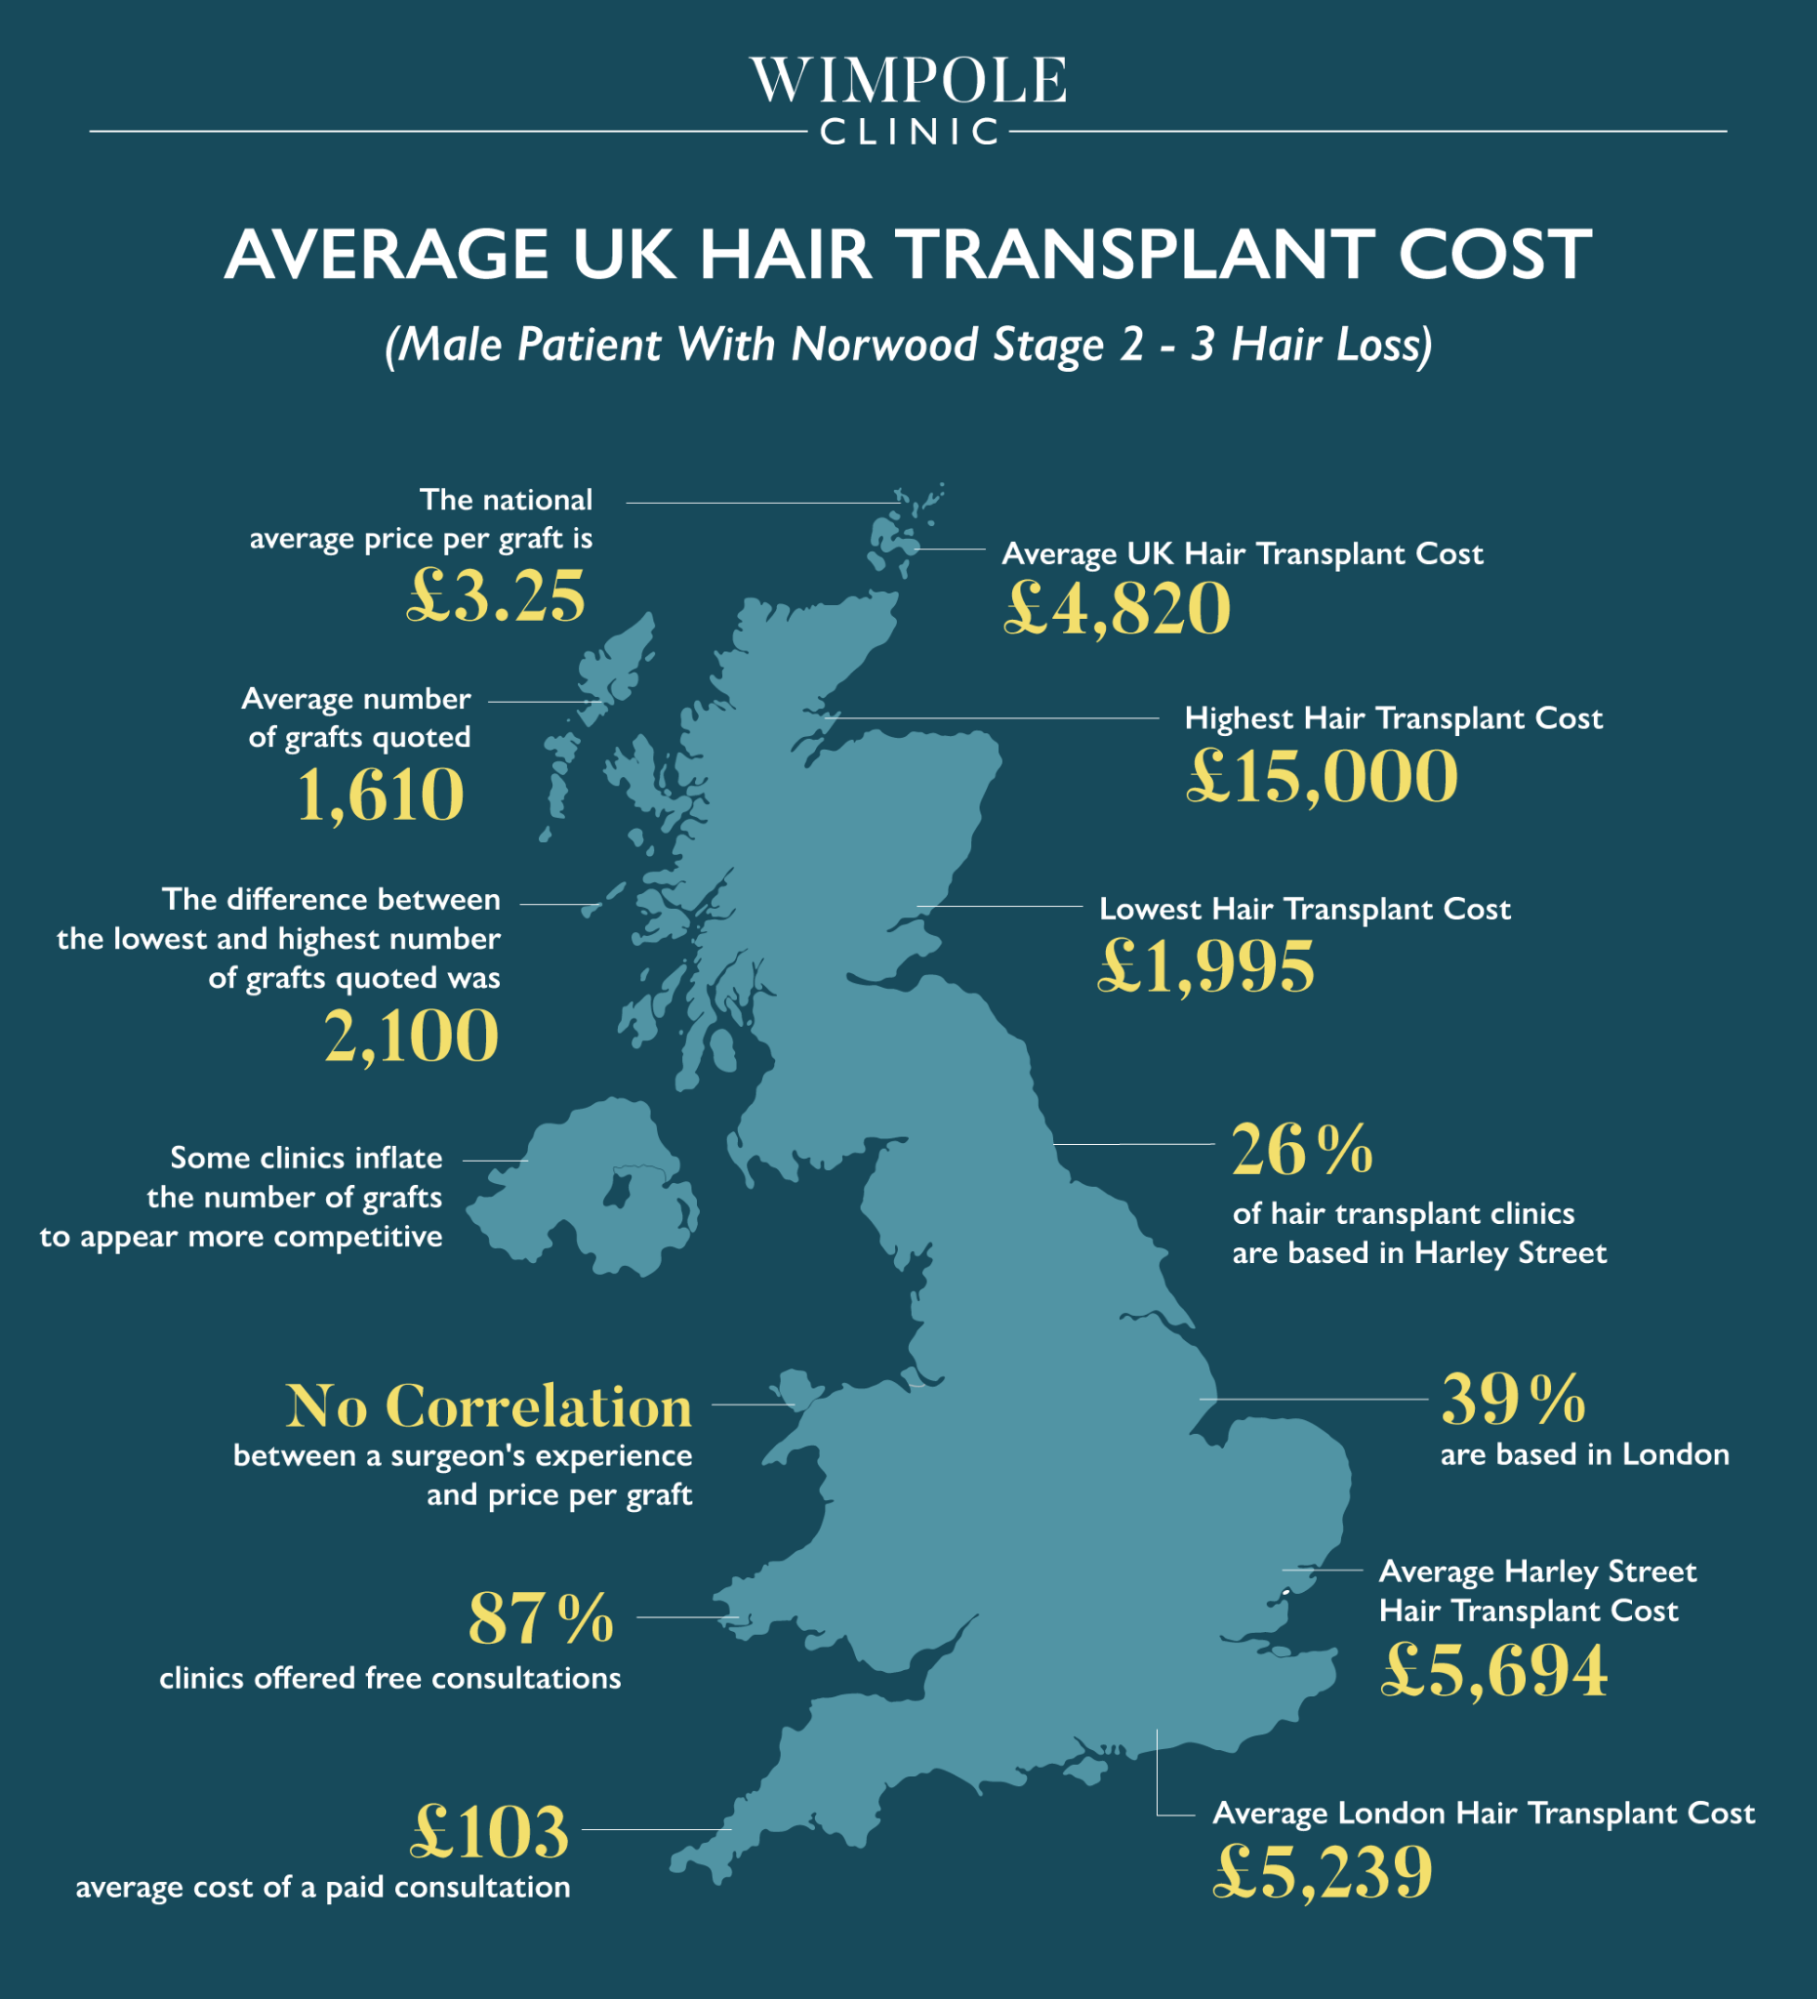 Baga Chipz’s Hair Transplant At The Wimpole Clinic: Results, Costs, Grafts, Wimpole Clinic